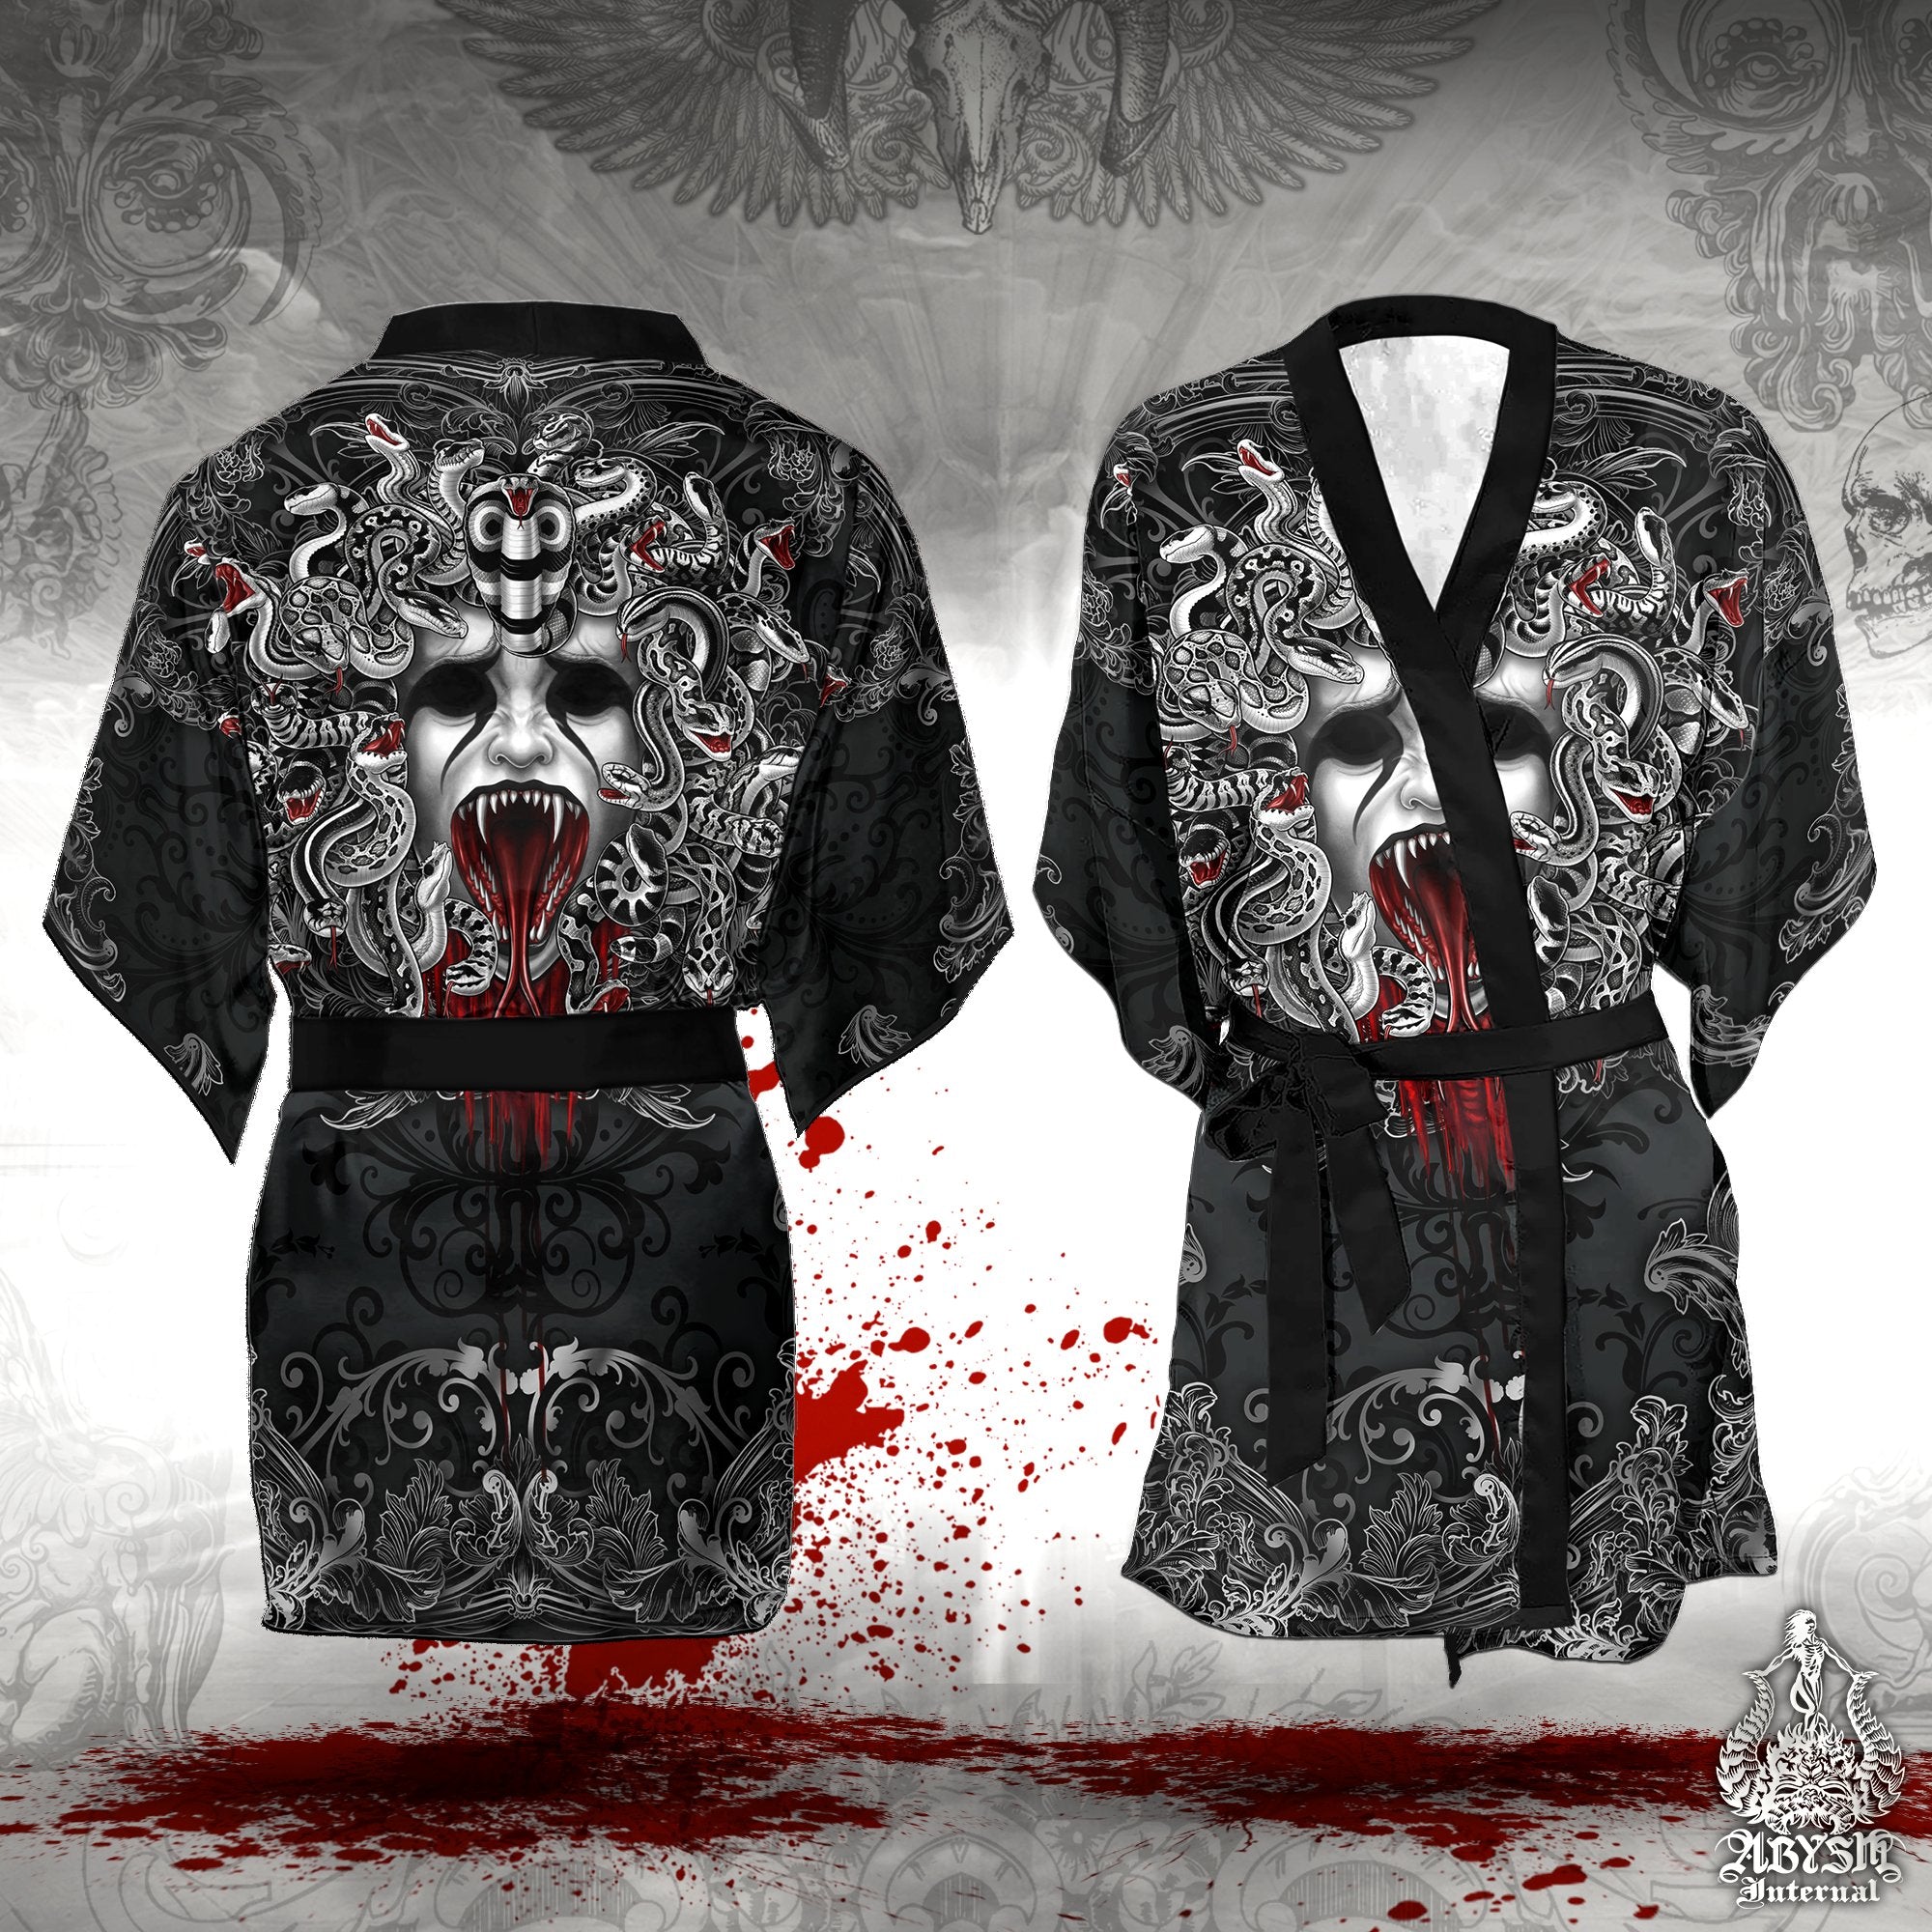 Black Gothic Short Kimono Robe, Beach Party Outfit, Medusa Coverup, Summer Festival, Nu Goth Alternative Clothing, Unisex - Skull, 2 Faces, 3 Colors - Abysm Internal